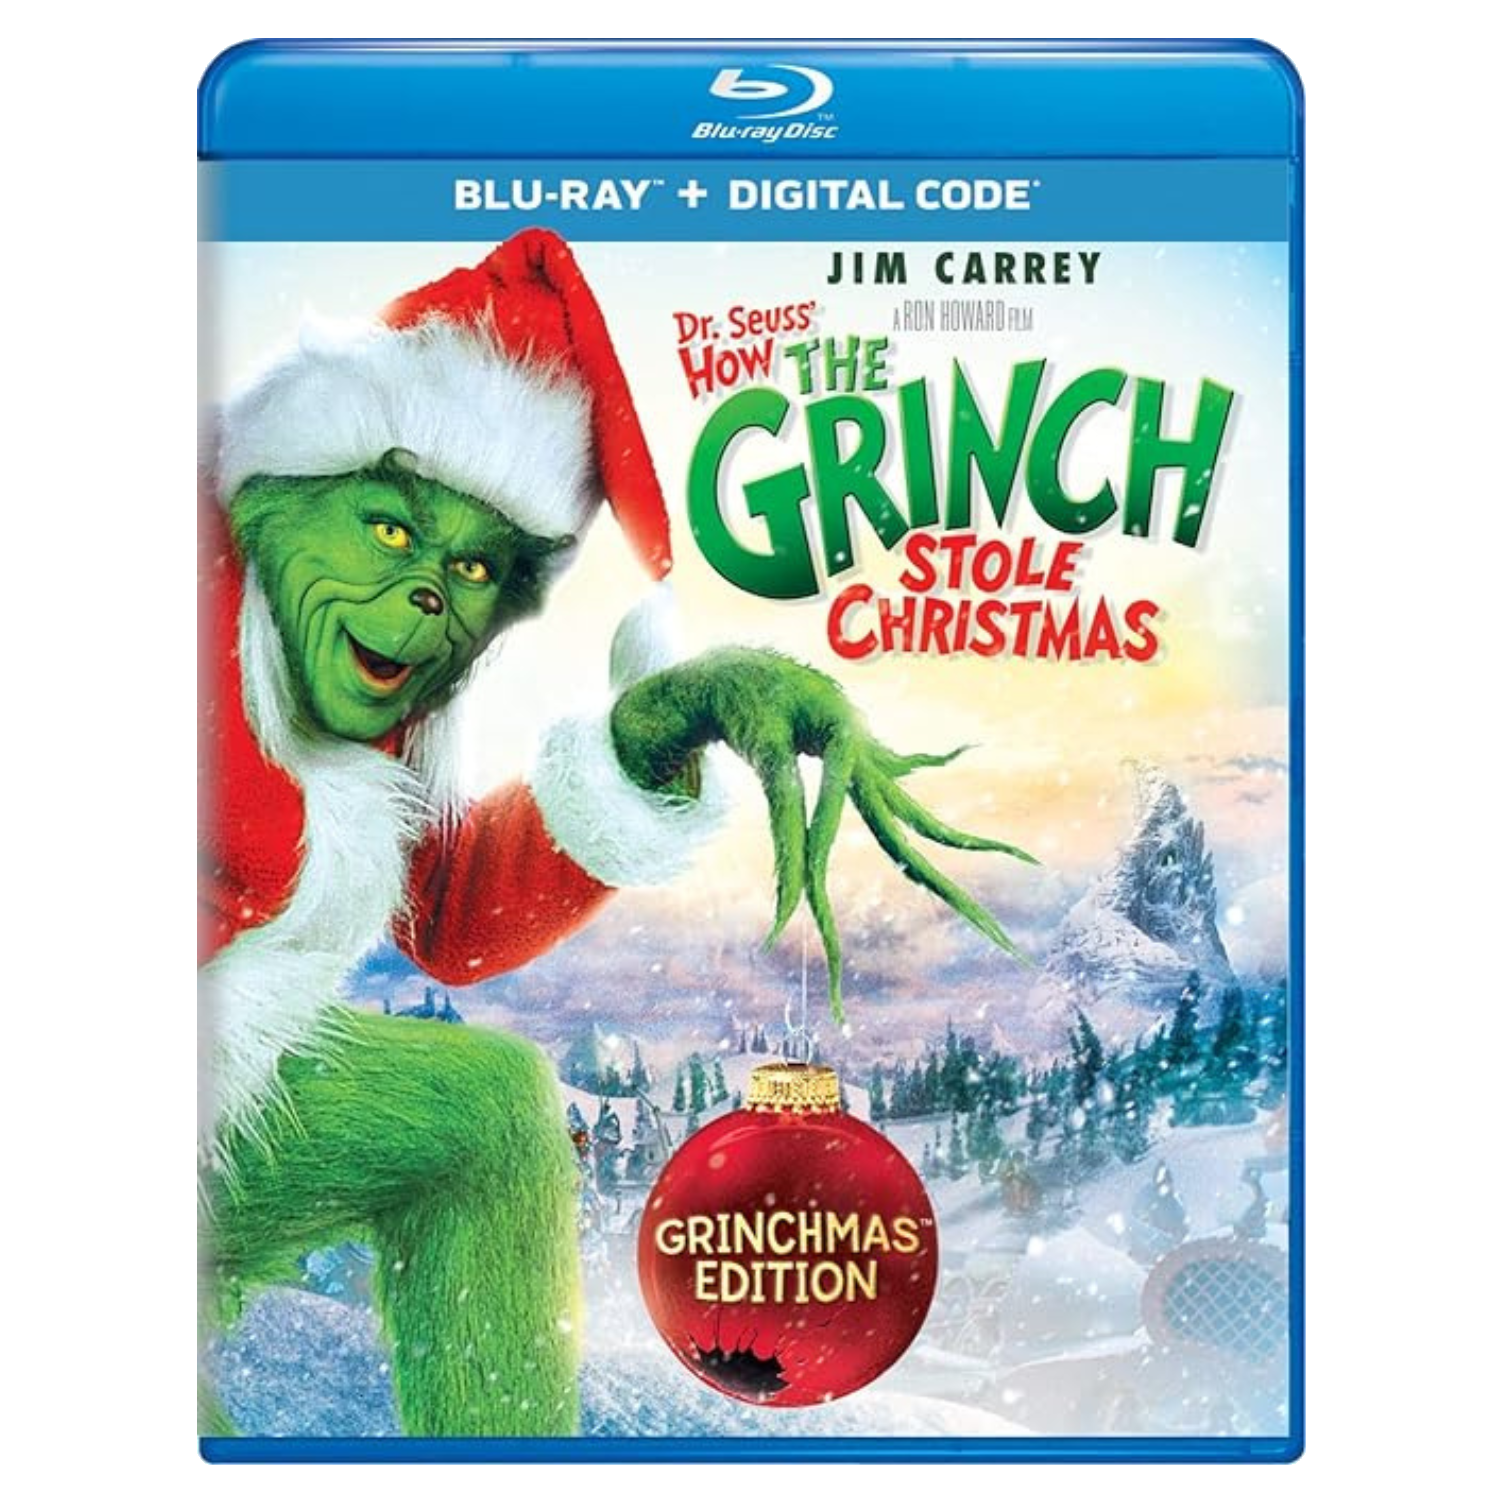 How the Grinch stole christmas